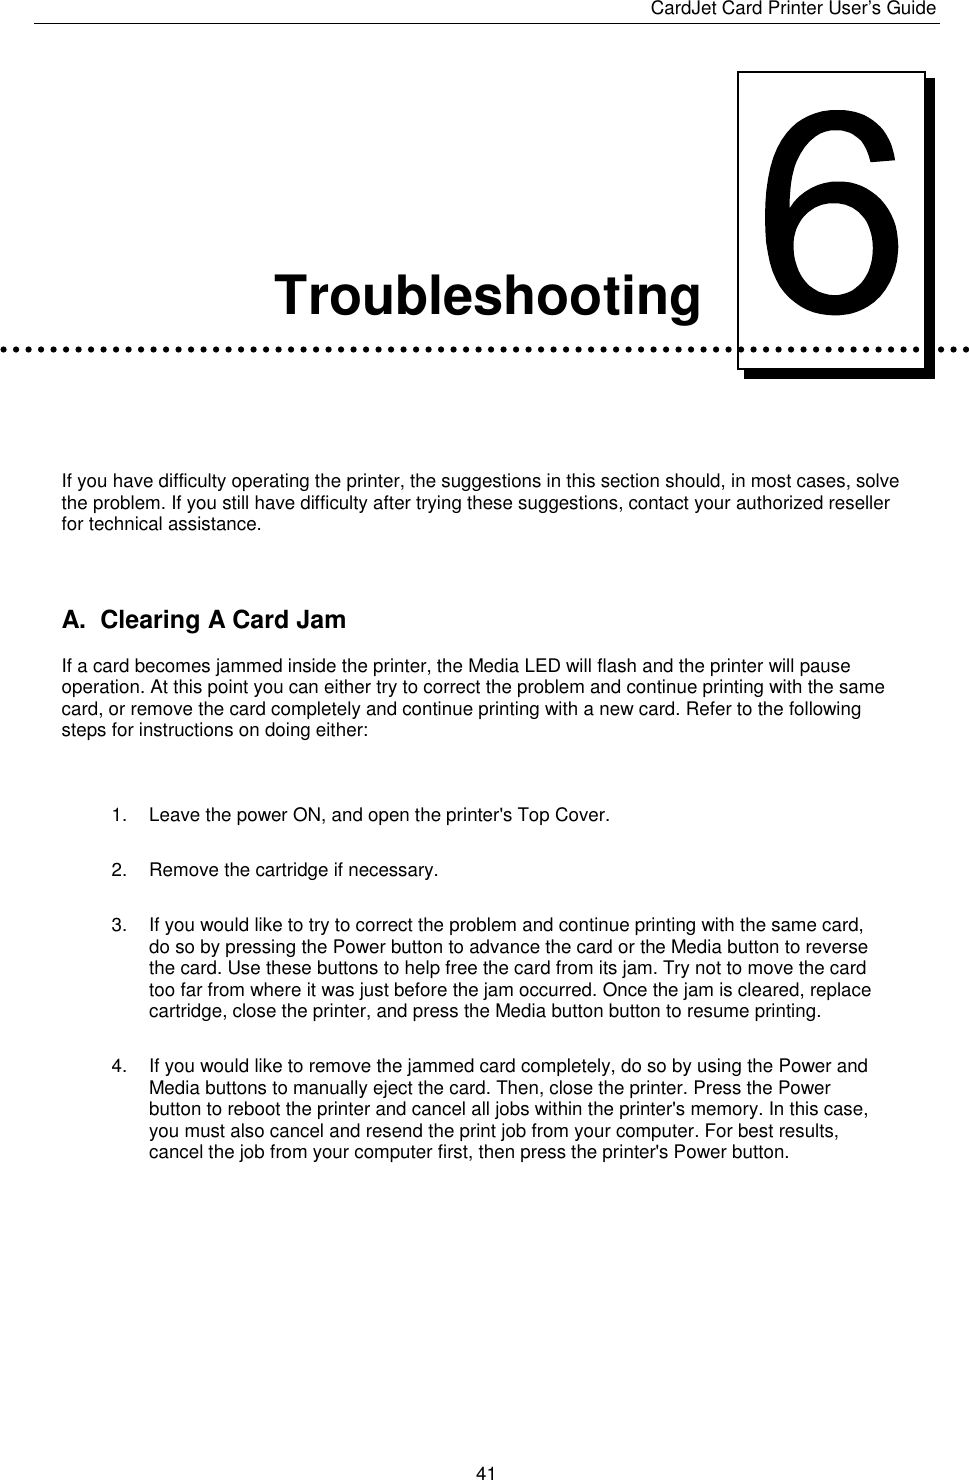 CardJet Card Printer User’s Guide  41      Troubleshooting   If you have difficulty operating the printer, the suggestions in this section should, in most cases, solve the problem. If you still have difficulty after trying these suggestions, contact your authorized reseller for technical assistance.  A.  Clearing A Card Jam If a card becomes jammed inside the printer, the Media LED will flash and the printer will pause operation. At this point you can either try to correct the problem and continue printing with the same card, or remove the card completely and continue printing with a new card. Refer to the following steps for instructions on doing either:   1.  Leave the power ON, and open the printer&apos;s Top Cover. 2.  Remove the cartridge if necessary. 3.  If you would like to try to correct the problem and continue printing with the same card, do so by pressing the Power button to advance the card or the Media button to reverse the card. Use these buttons to help free the card from its jam. Try not to move the card too far from where it was just before the jam occurred. Once the jam is cleared, replace cartridge, close the printer, and press the Media button button to resume printing. 4.  If you would like to remove the jammed card completely, do so by using the Power and Media buttons to manually eject the card. Then, close the printer. Press the Power button to reboot the printer and cancel all jobs within the printer&apos;s memory. In this case, you must also cancel and resend the print job from your computer. For best results, cancel the job from your computer first, then press the printer&apos;s Power button.      